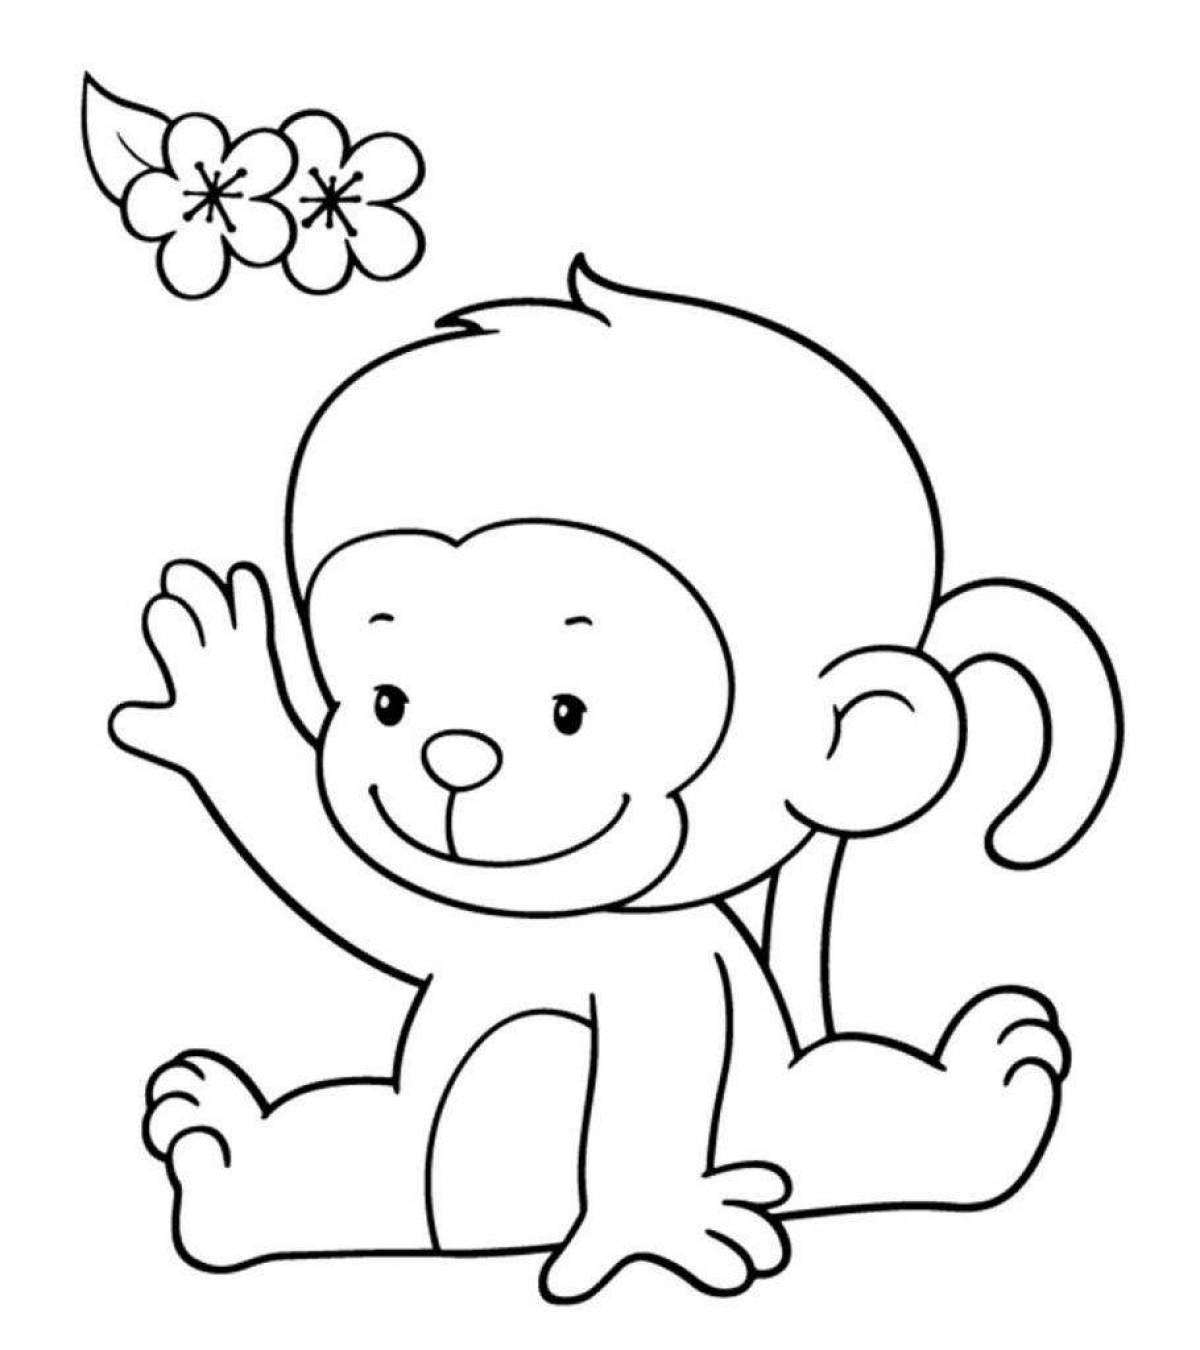 Adorable monkey coloring book for kids